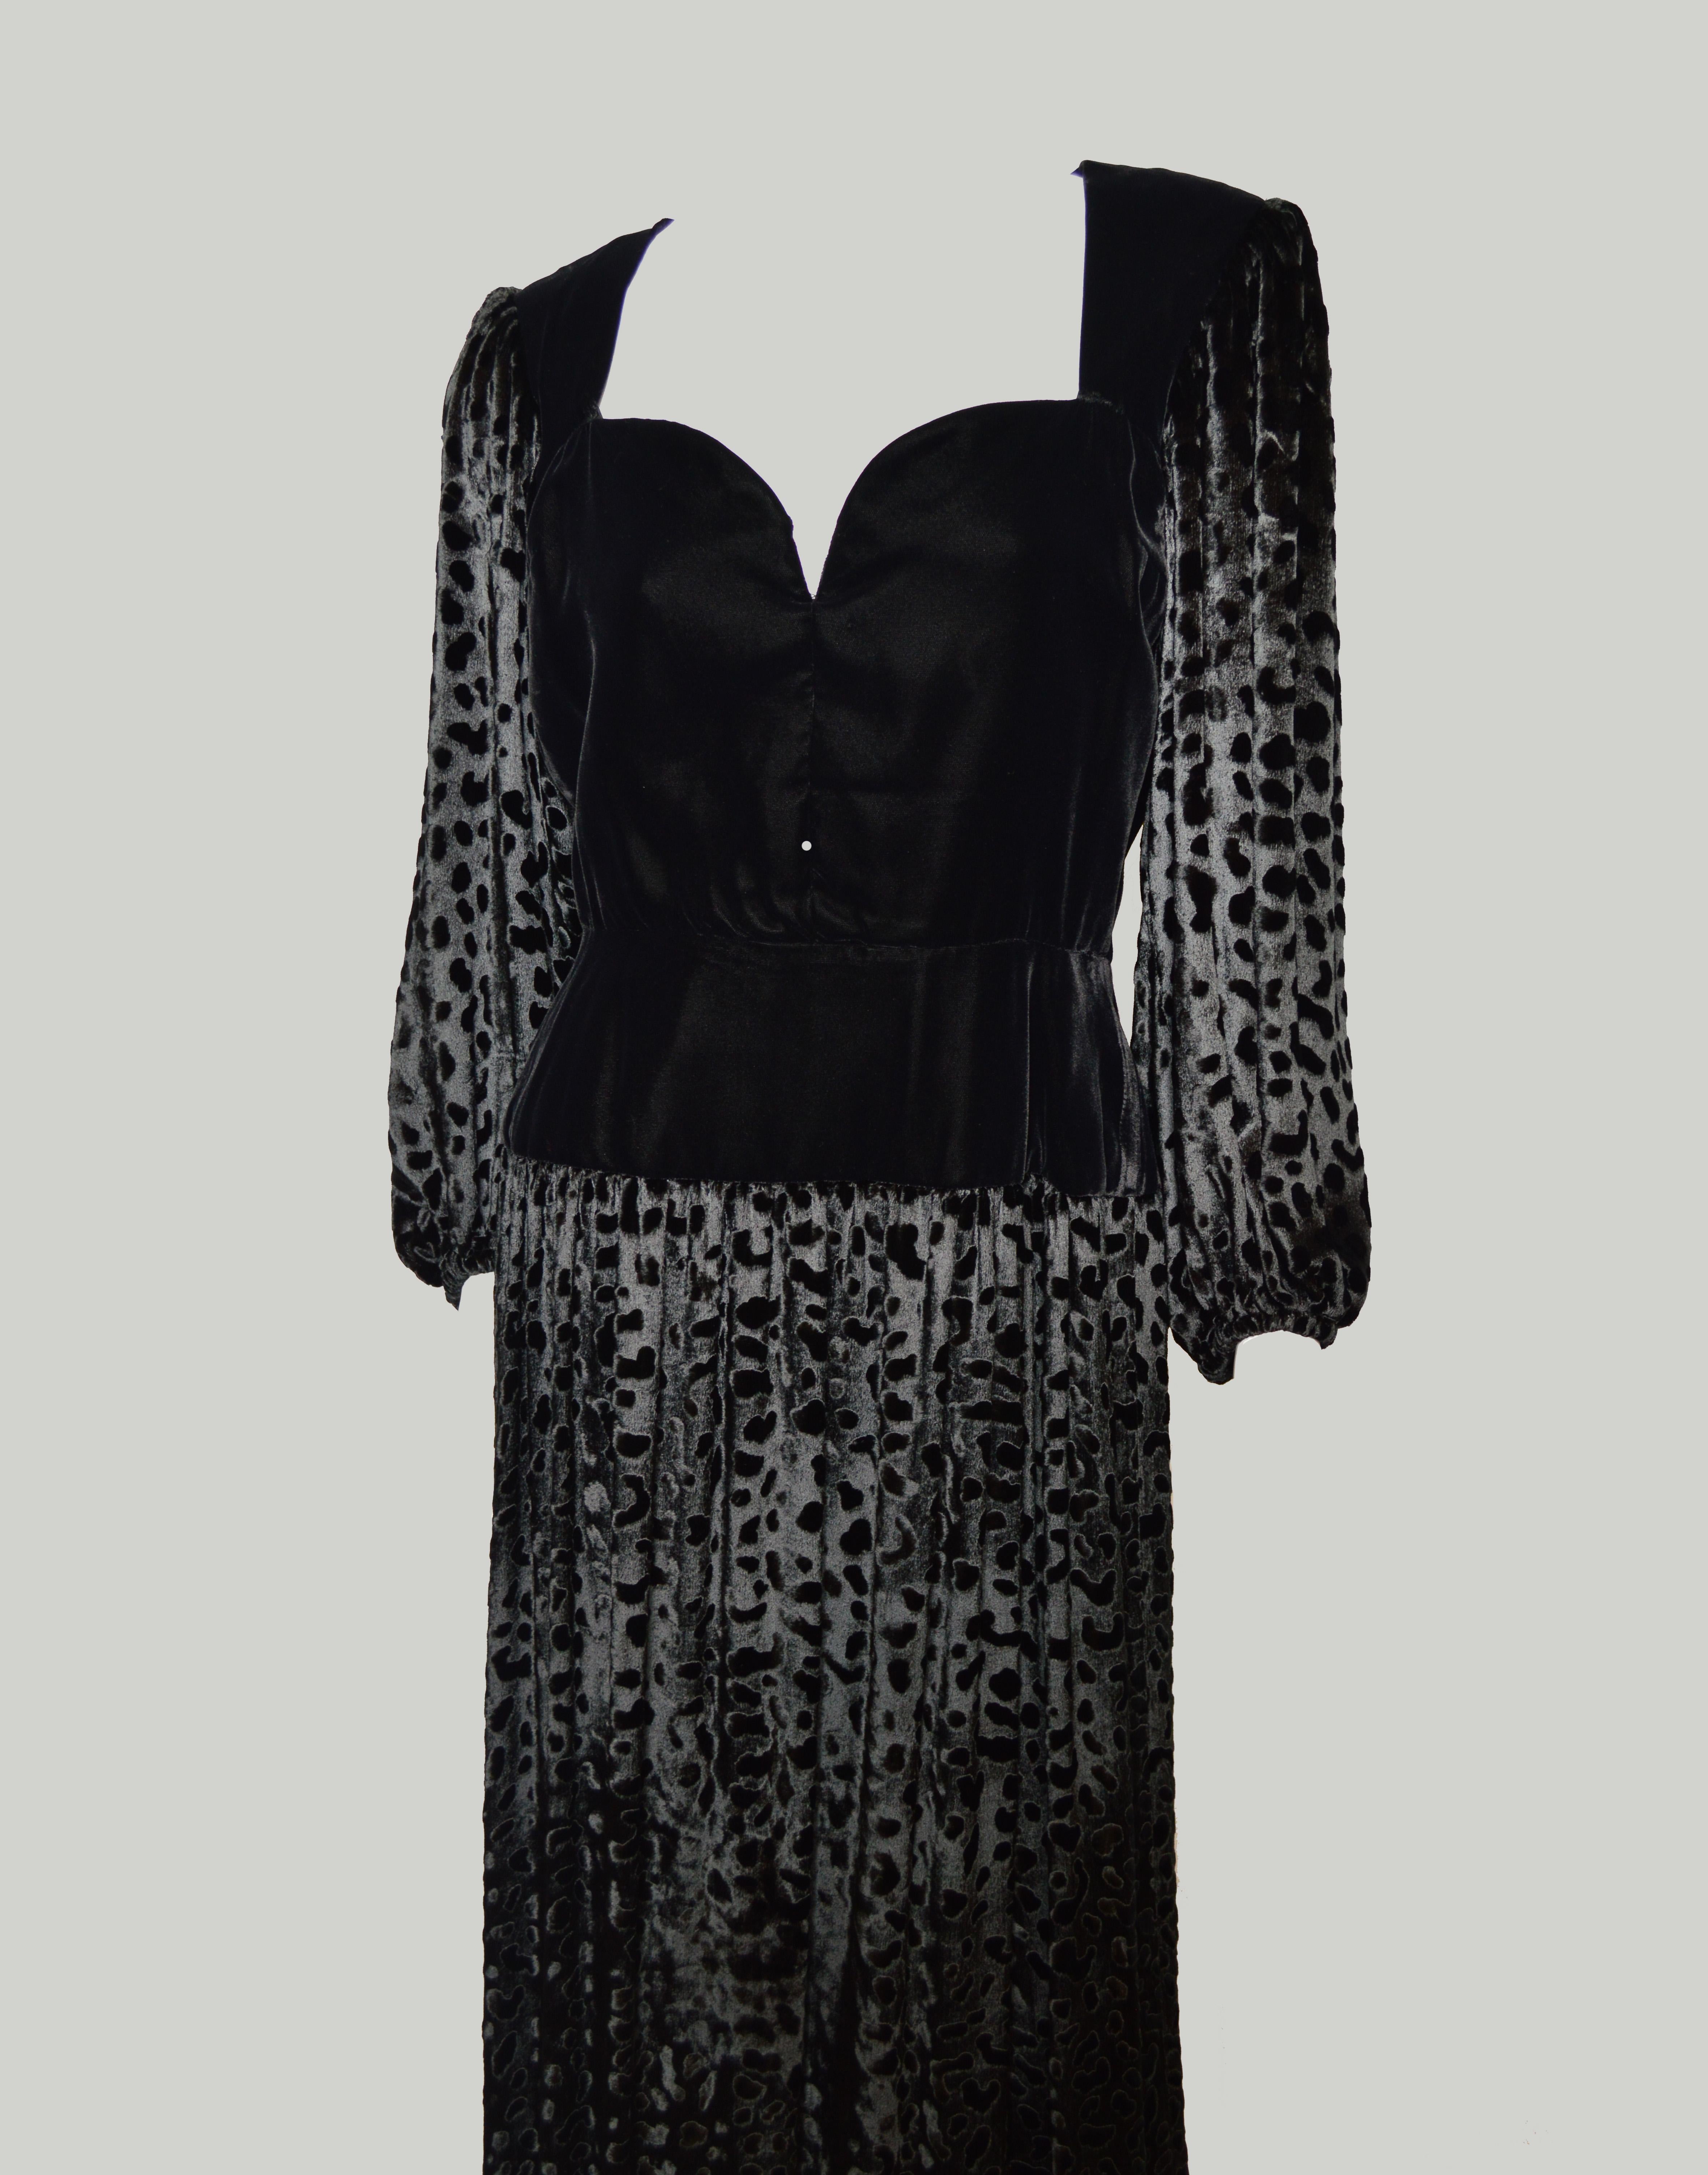 An exquisite vintage demi couture evening gown from the 1980s by Yves Saint Laurent. Beautifully constructed with many details, finished by hand, in a sumptuous black velvet. In a maxi length with a covered velvet buttons and a long gathered skirt,